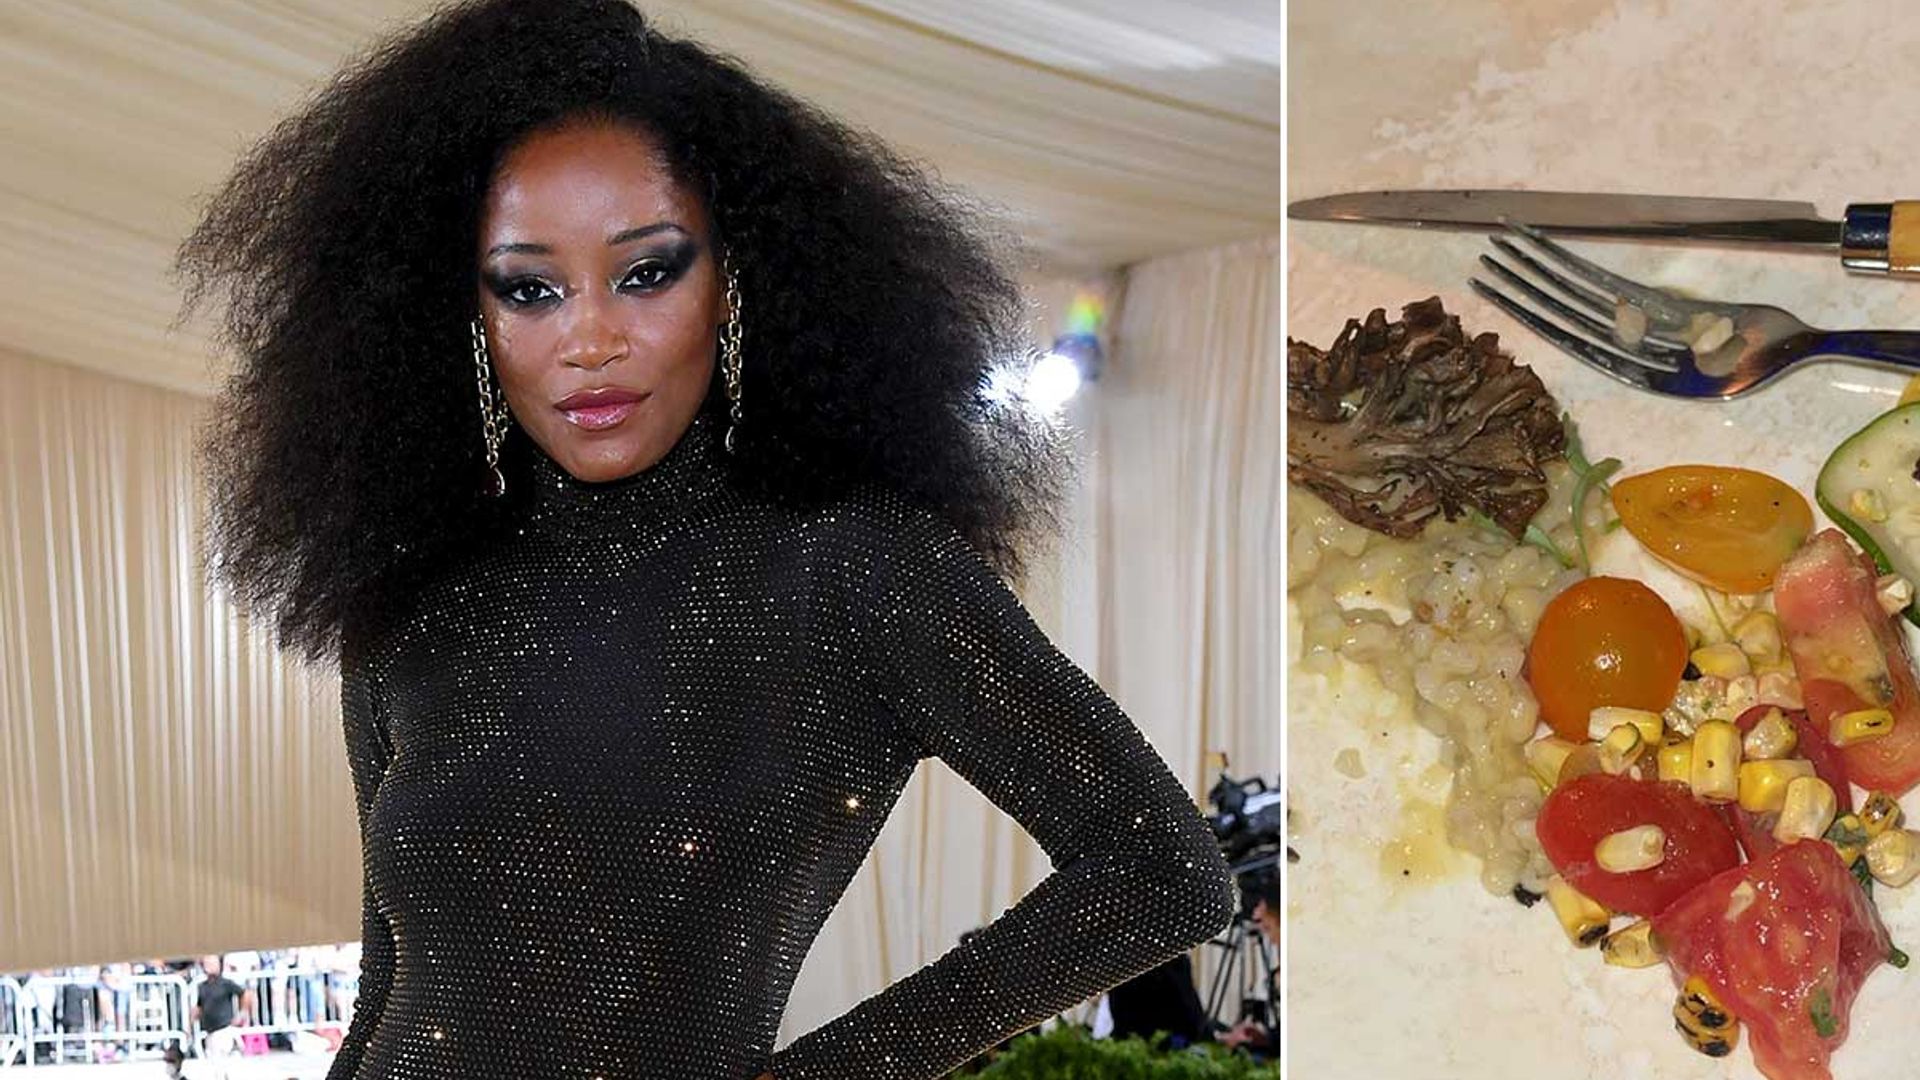 This celebrity just exposed the Met Gala's top secret menu – and it's not what you'd expect